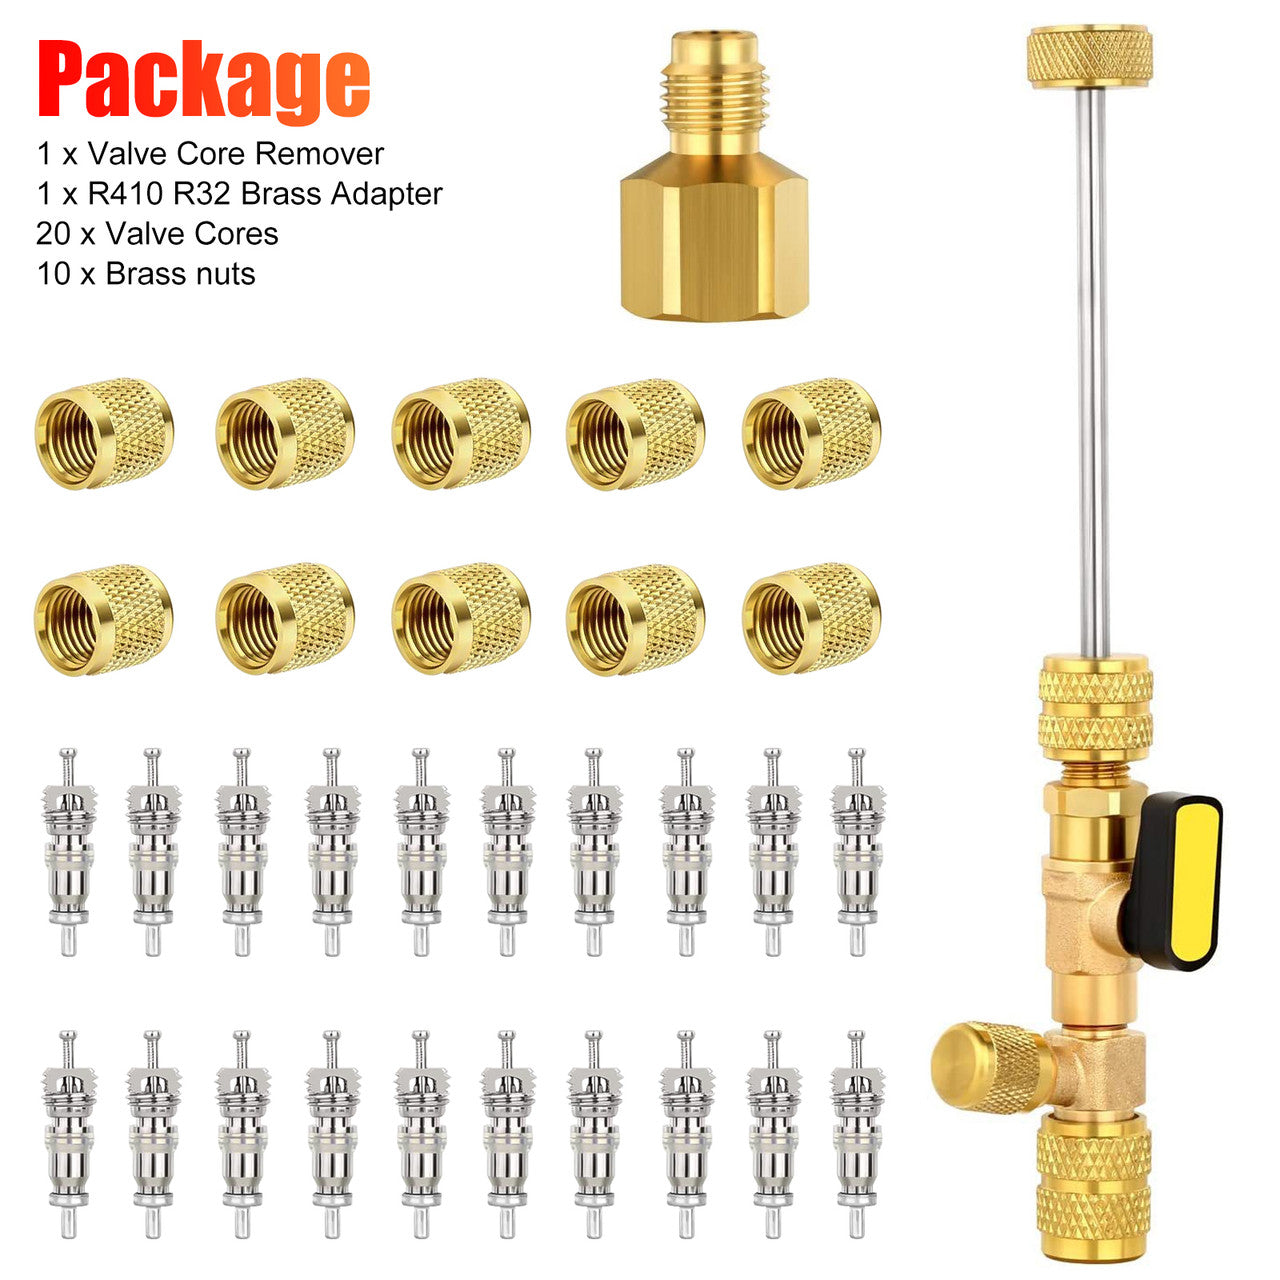 32 Pieces Valve Core Remover Installer Tool - Dual Size Sae 1/4 & 5/16 Port, Compatible with R22 R12 R407 R410 R404 R32 R600 A/C